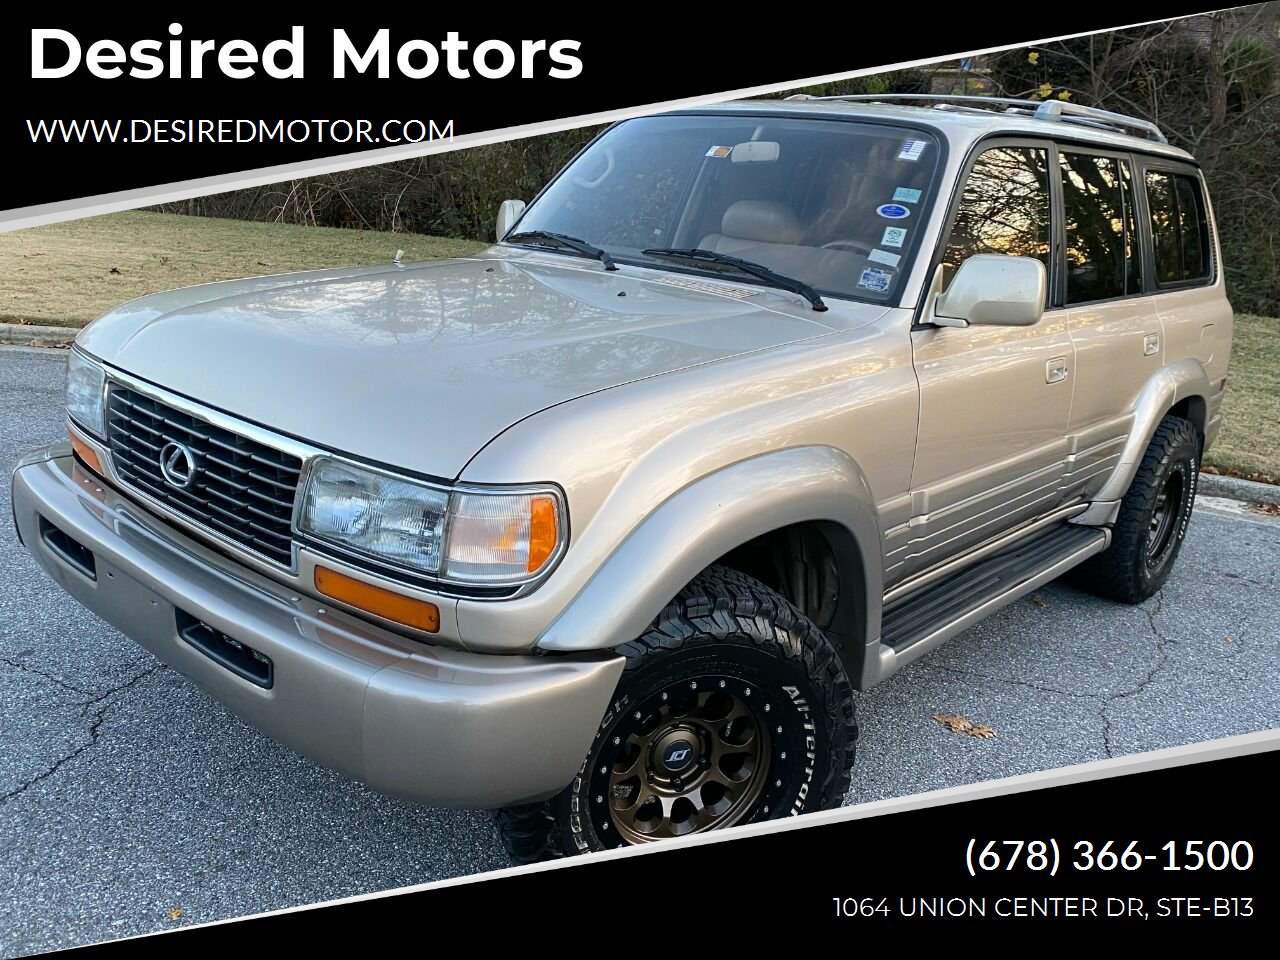 Used Lexus LX 450 SUV  Crossovers for Sale Near Me in Gainesville GA   Autotrader